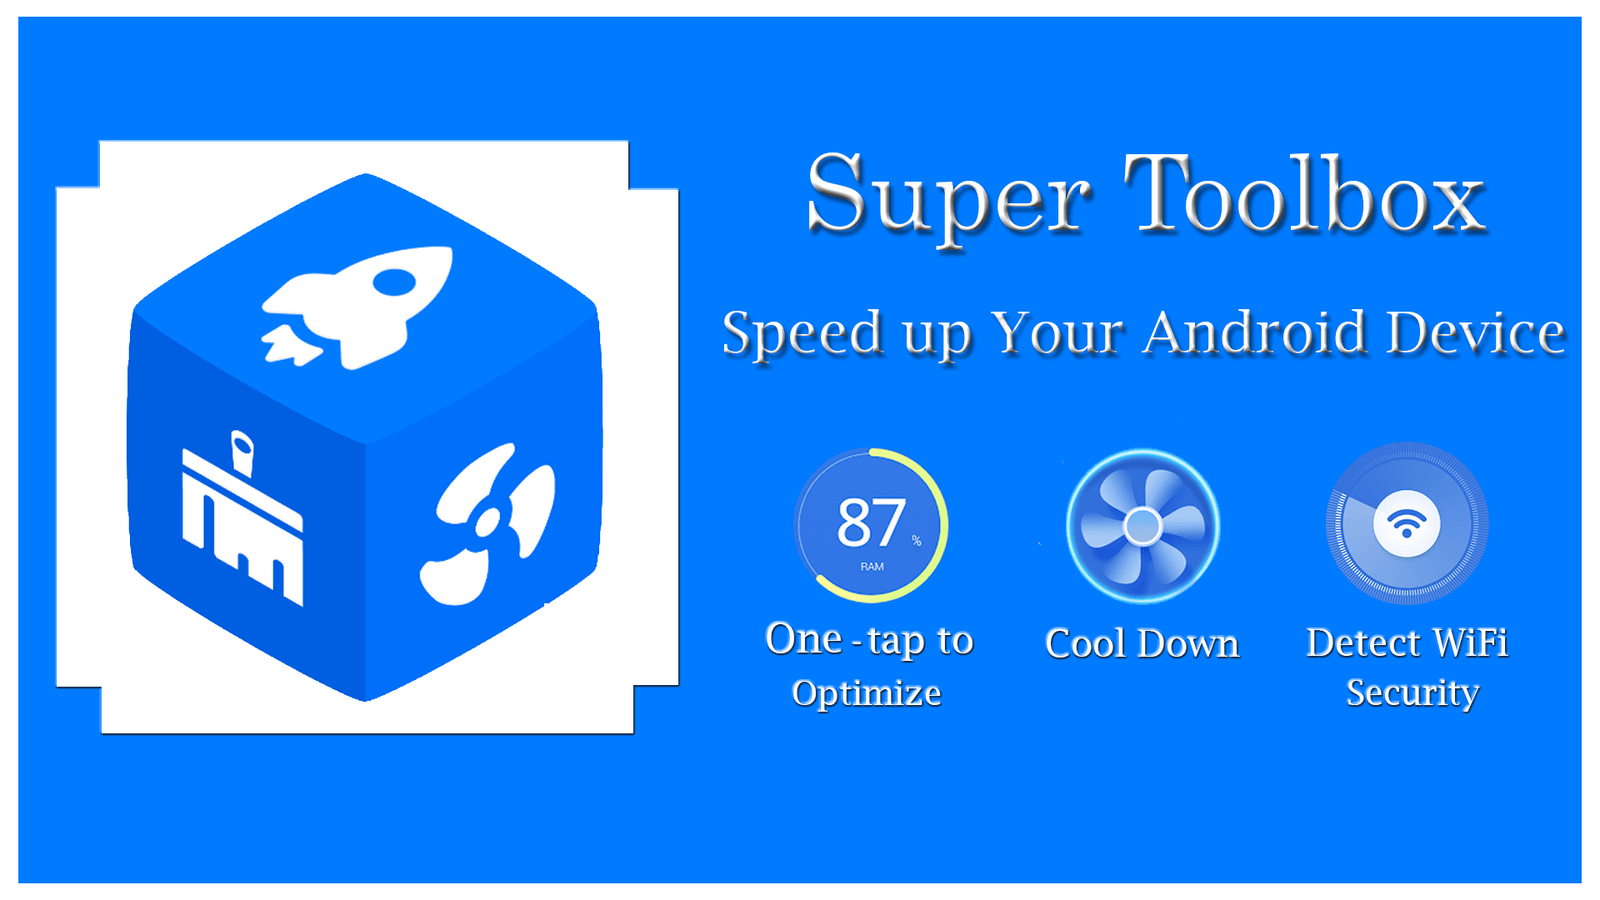 Super Toolbox - Speed up Your Android Device